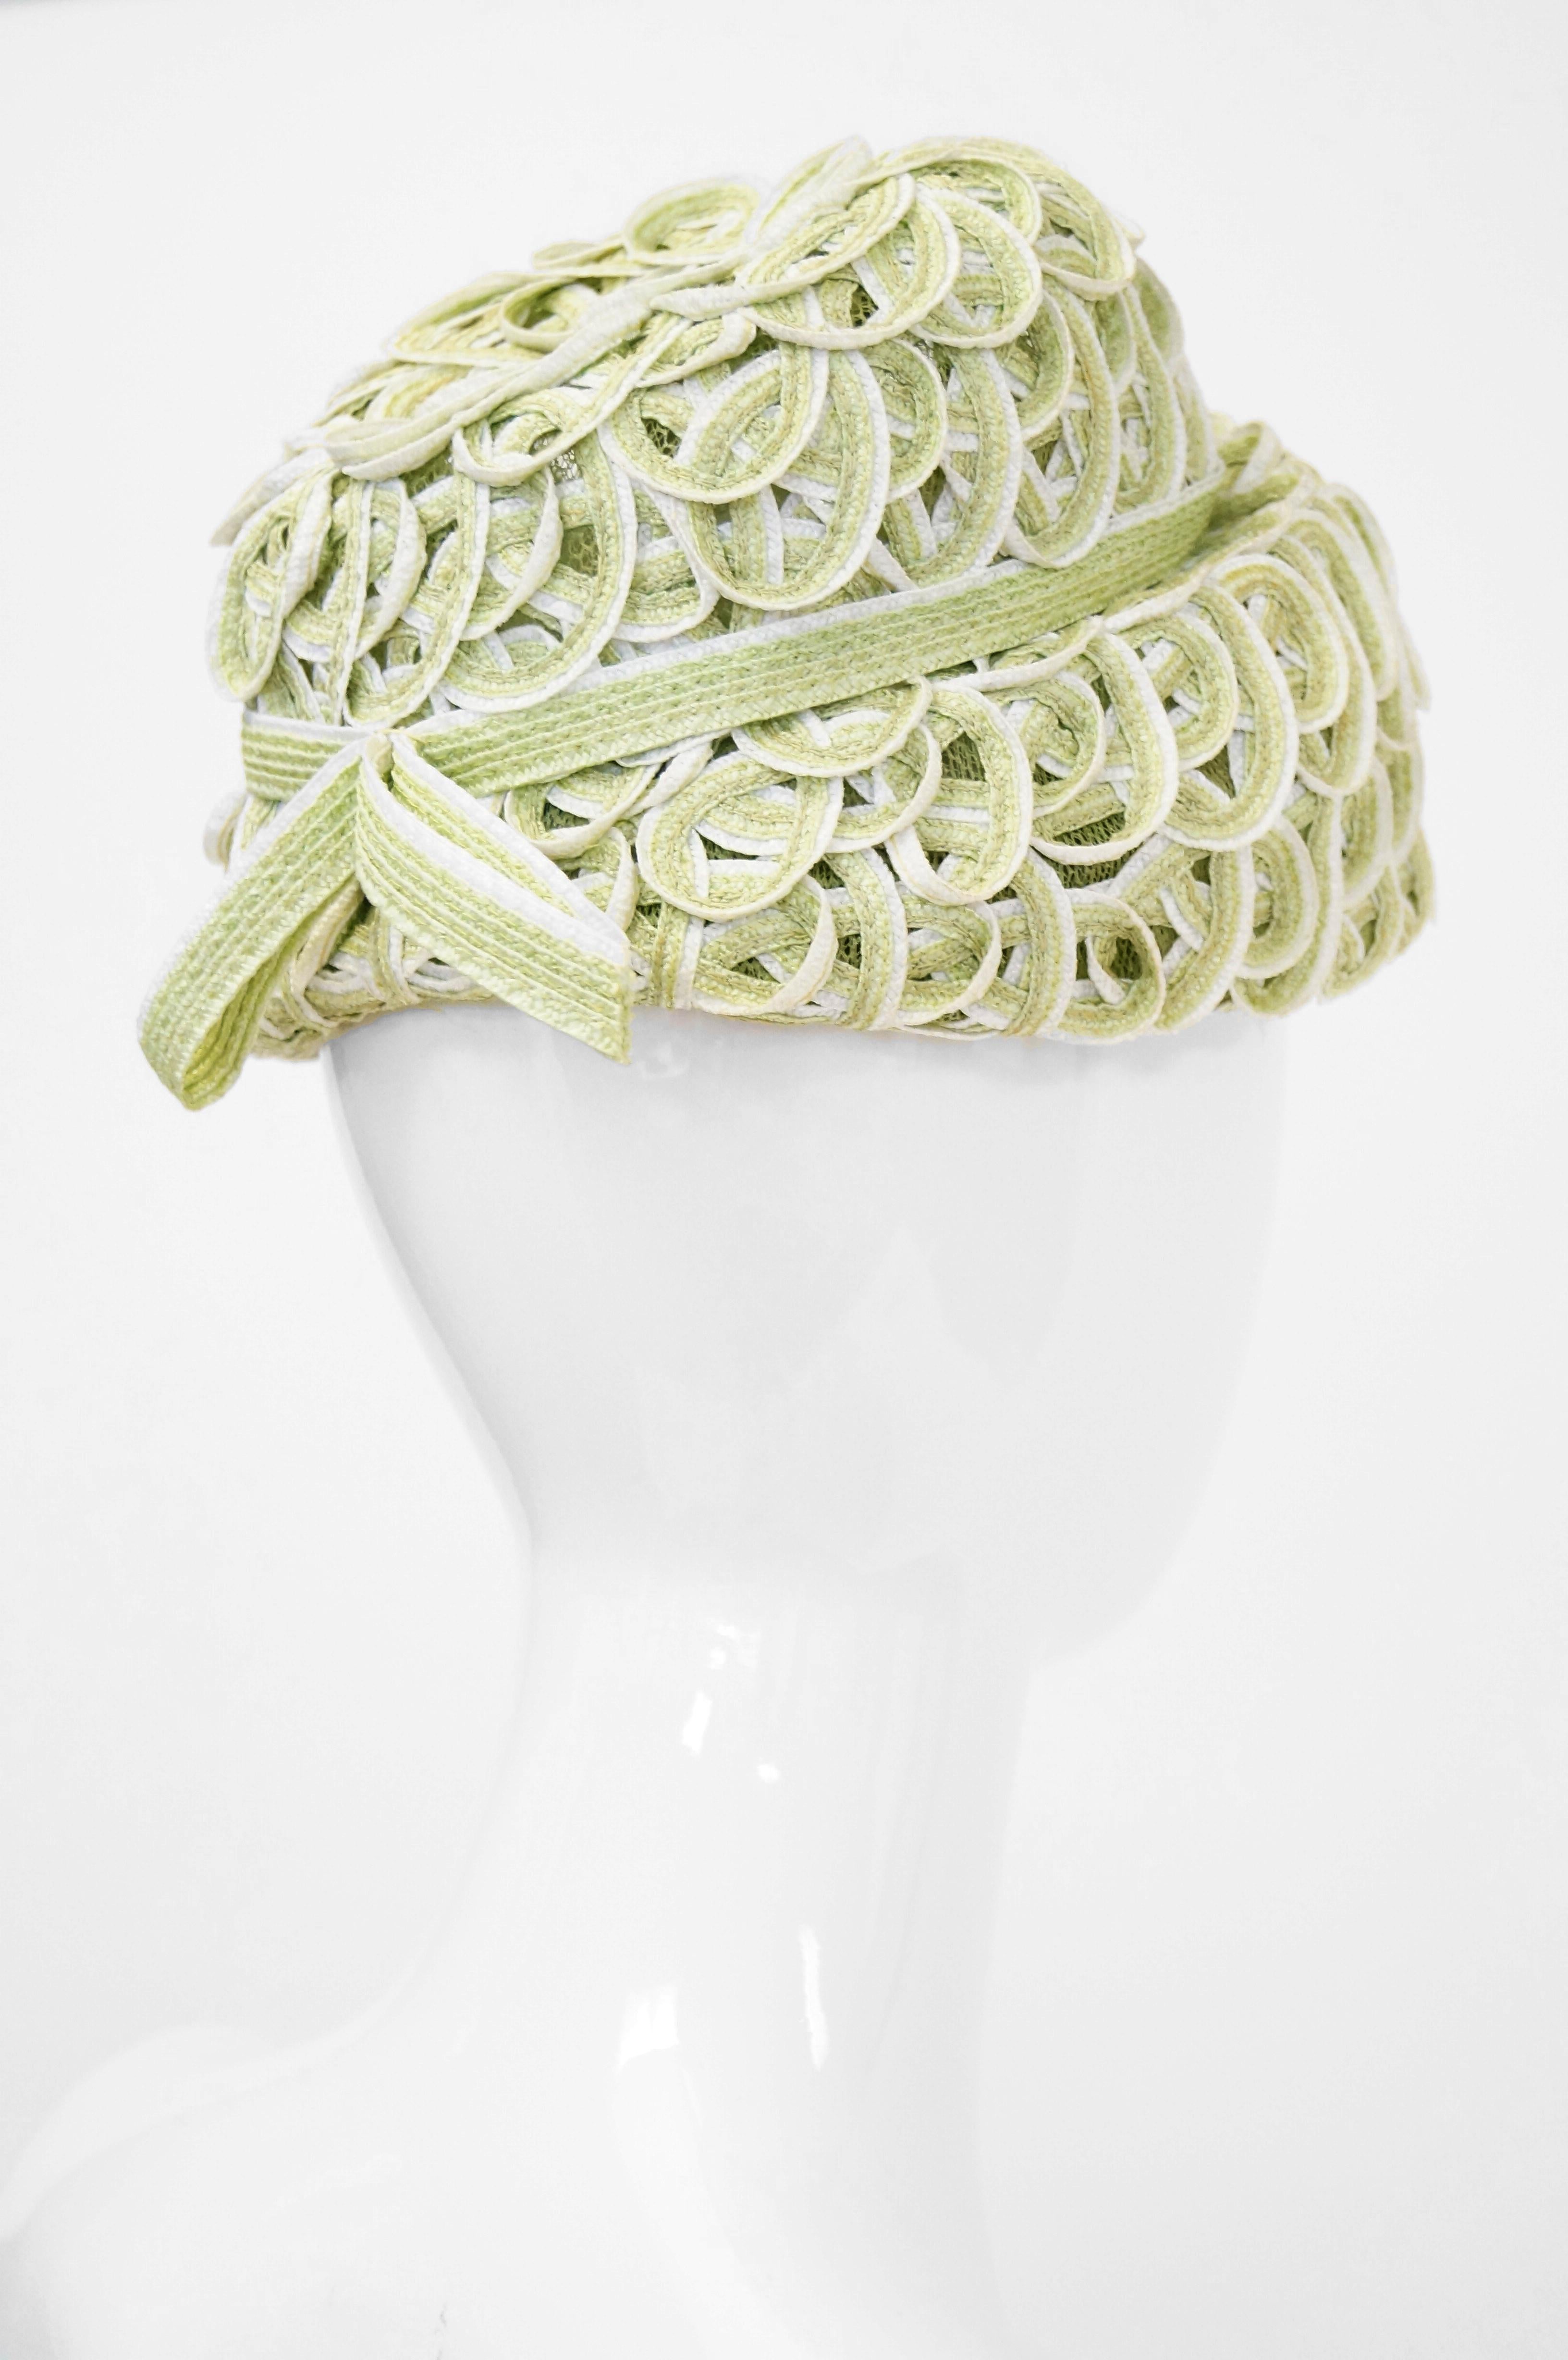 Balenciaga Reproduction Peach Basket Hat in a Subtle Green, 1950s  In Excellent Condition For Sale In Houston, TX